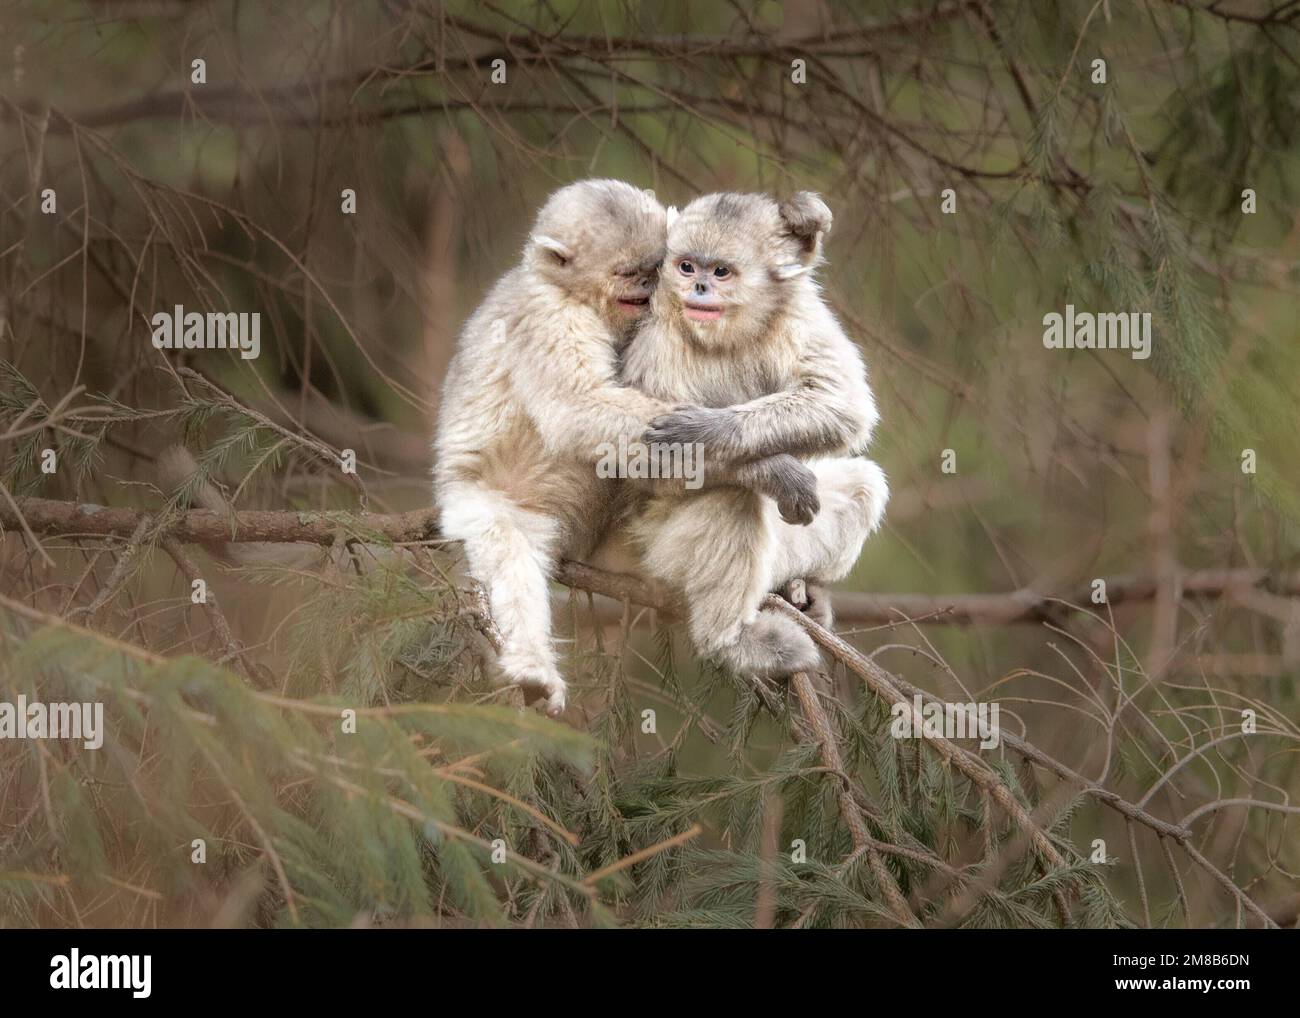 Looking like ewoks. China: THESE EXPRESSIVE images show wild snub-nosed monkey and their amazing range of emotions that have seen members of this spec Stock Photo